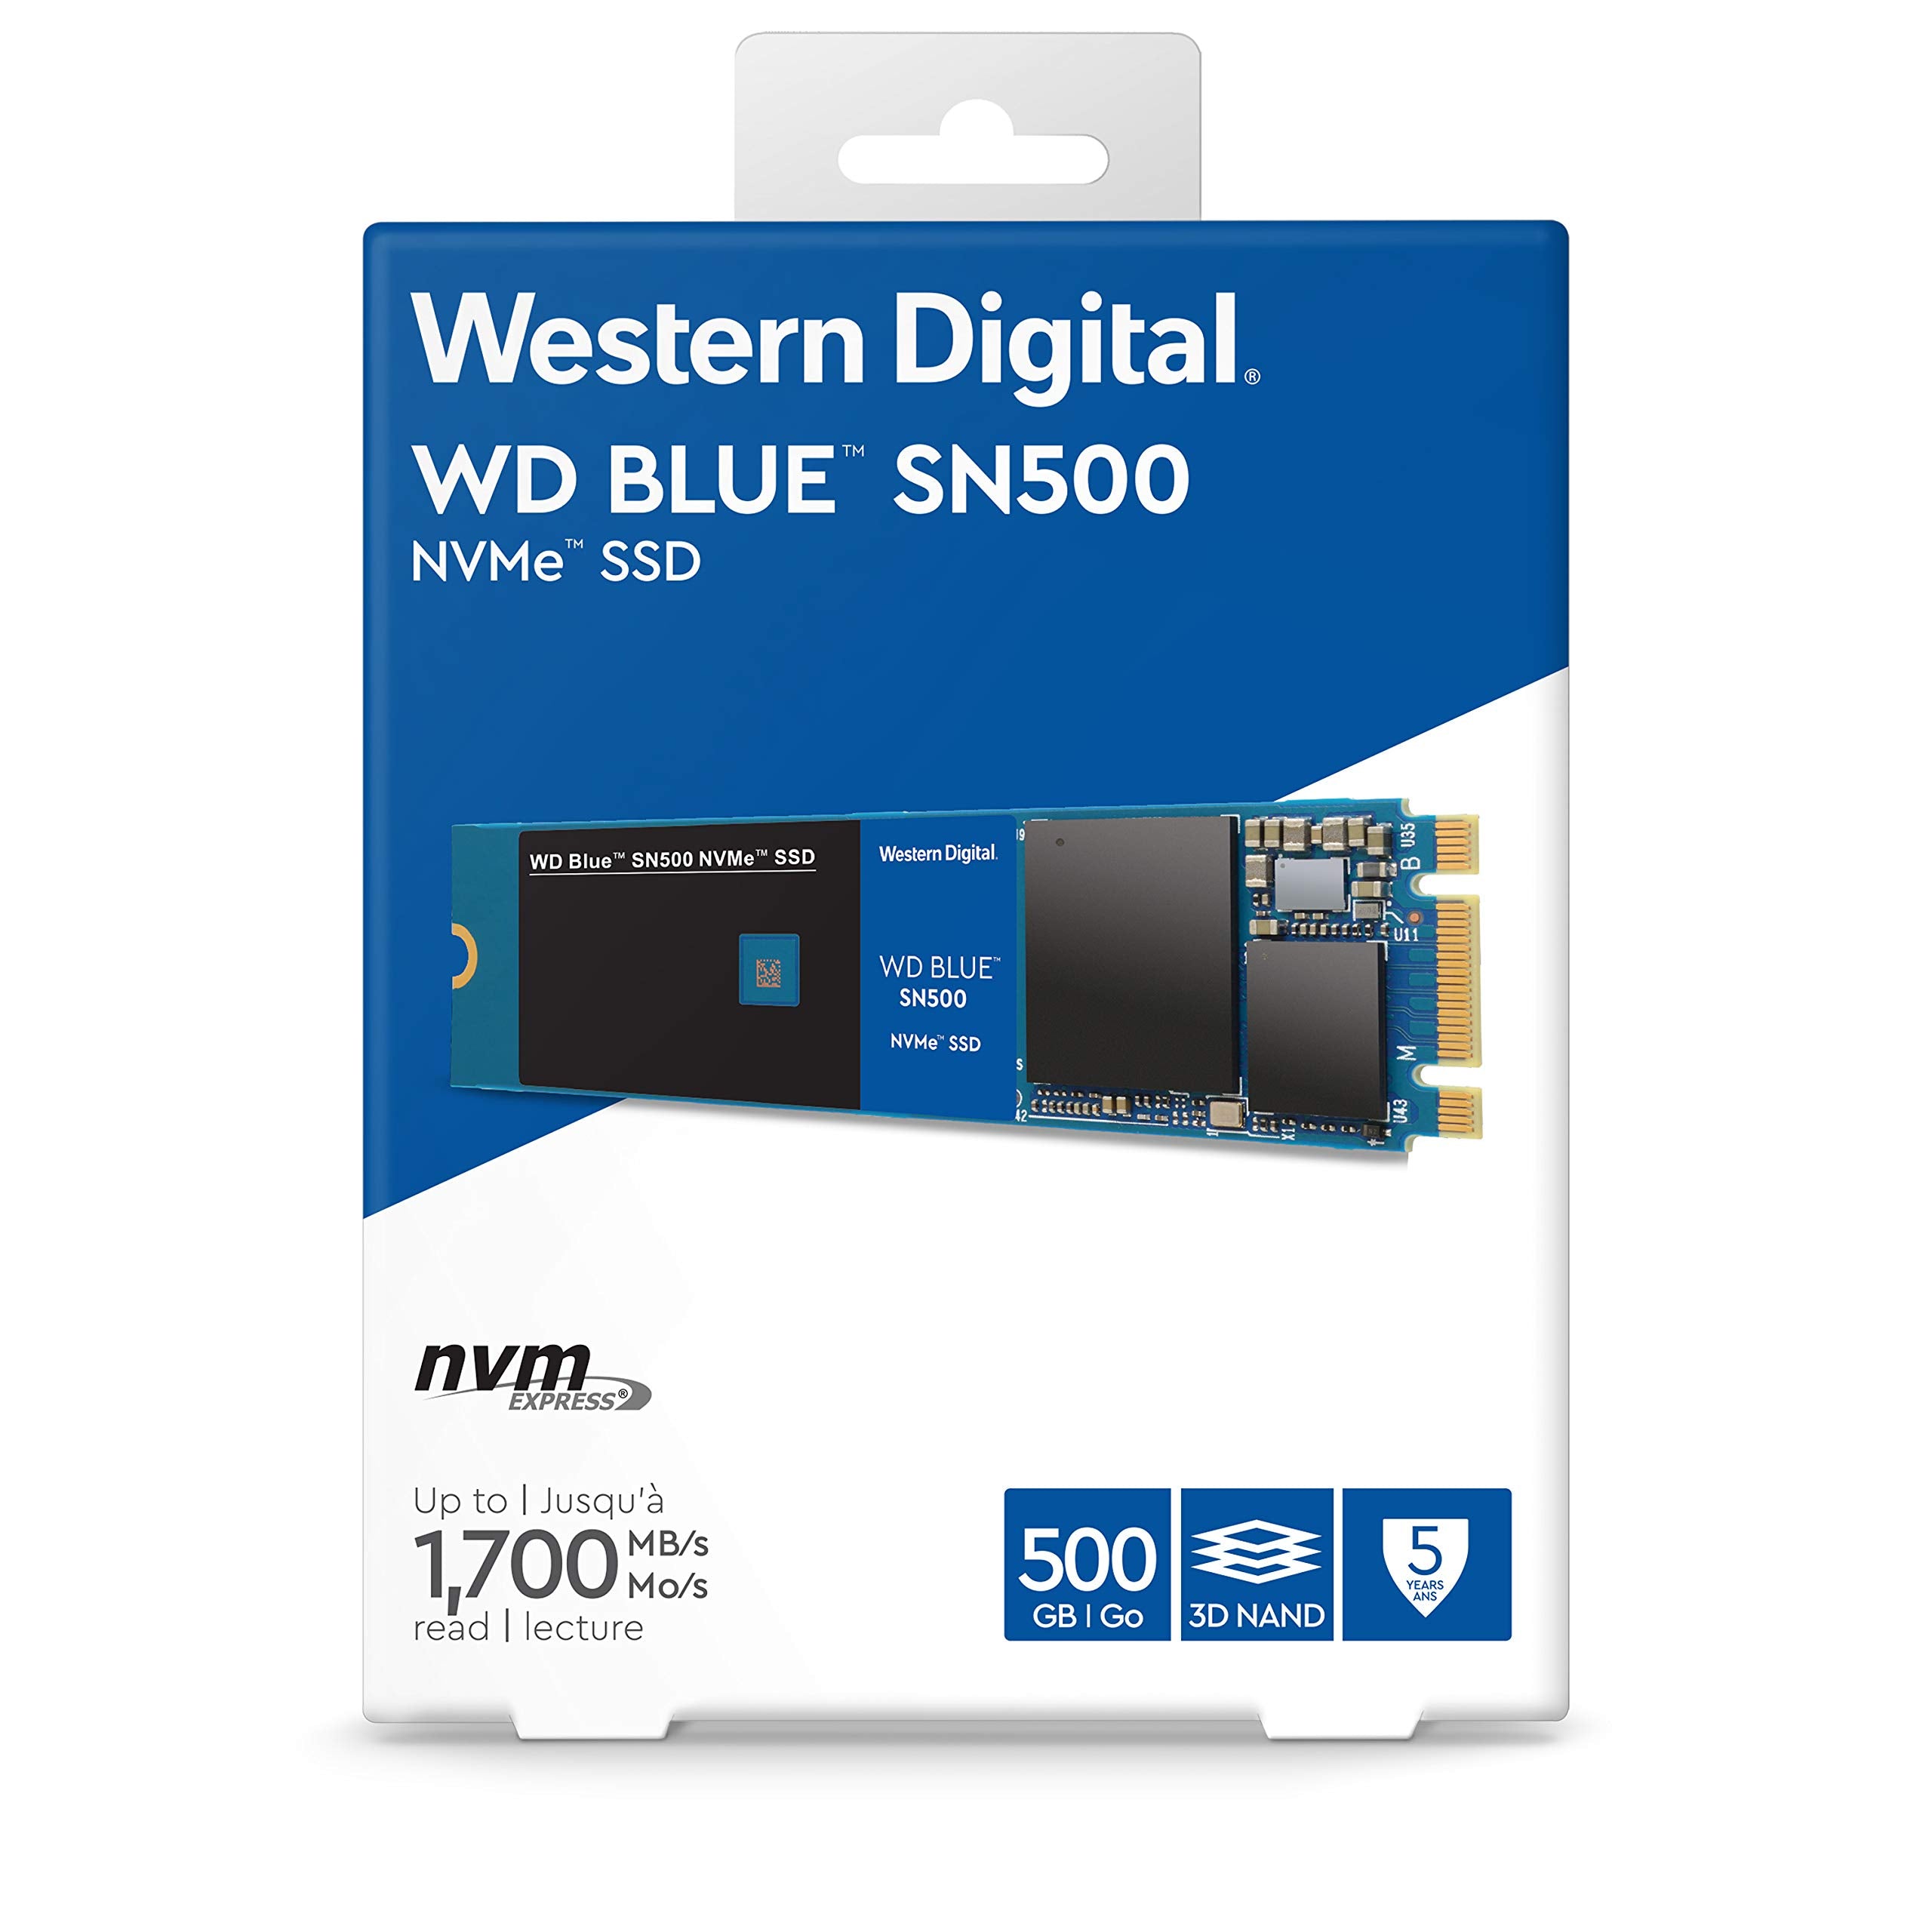 WD Blue SN500 500GB NVMe Internal SSD - Gen3 PCIe, M.2 2280, 3D NAND, Up to 1700 MB/s - WDS500G1B0C (Open Box, Like New)